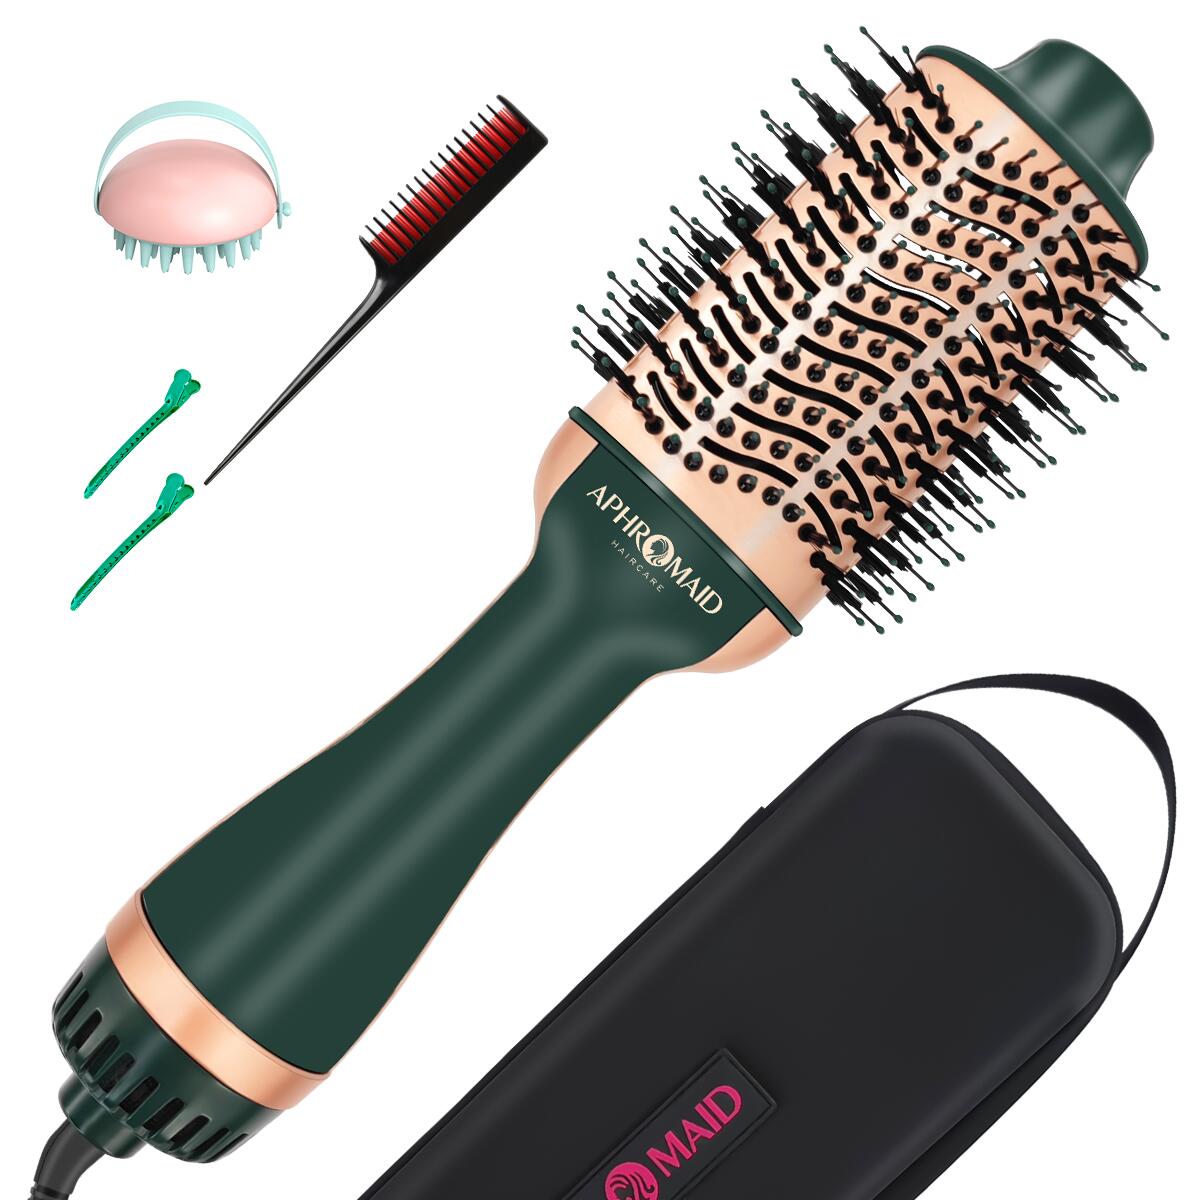  Hot Air Brush, Aima Beauty Professional One Step Hair Dryer &  Volumizer 4 in 1 Upgrade Anti-Scald Negative Ionic Technology for All Hair  Types, Light Green : Beauty & Personal Care